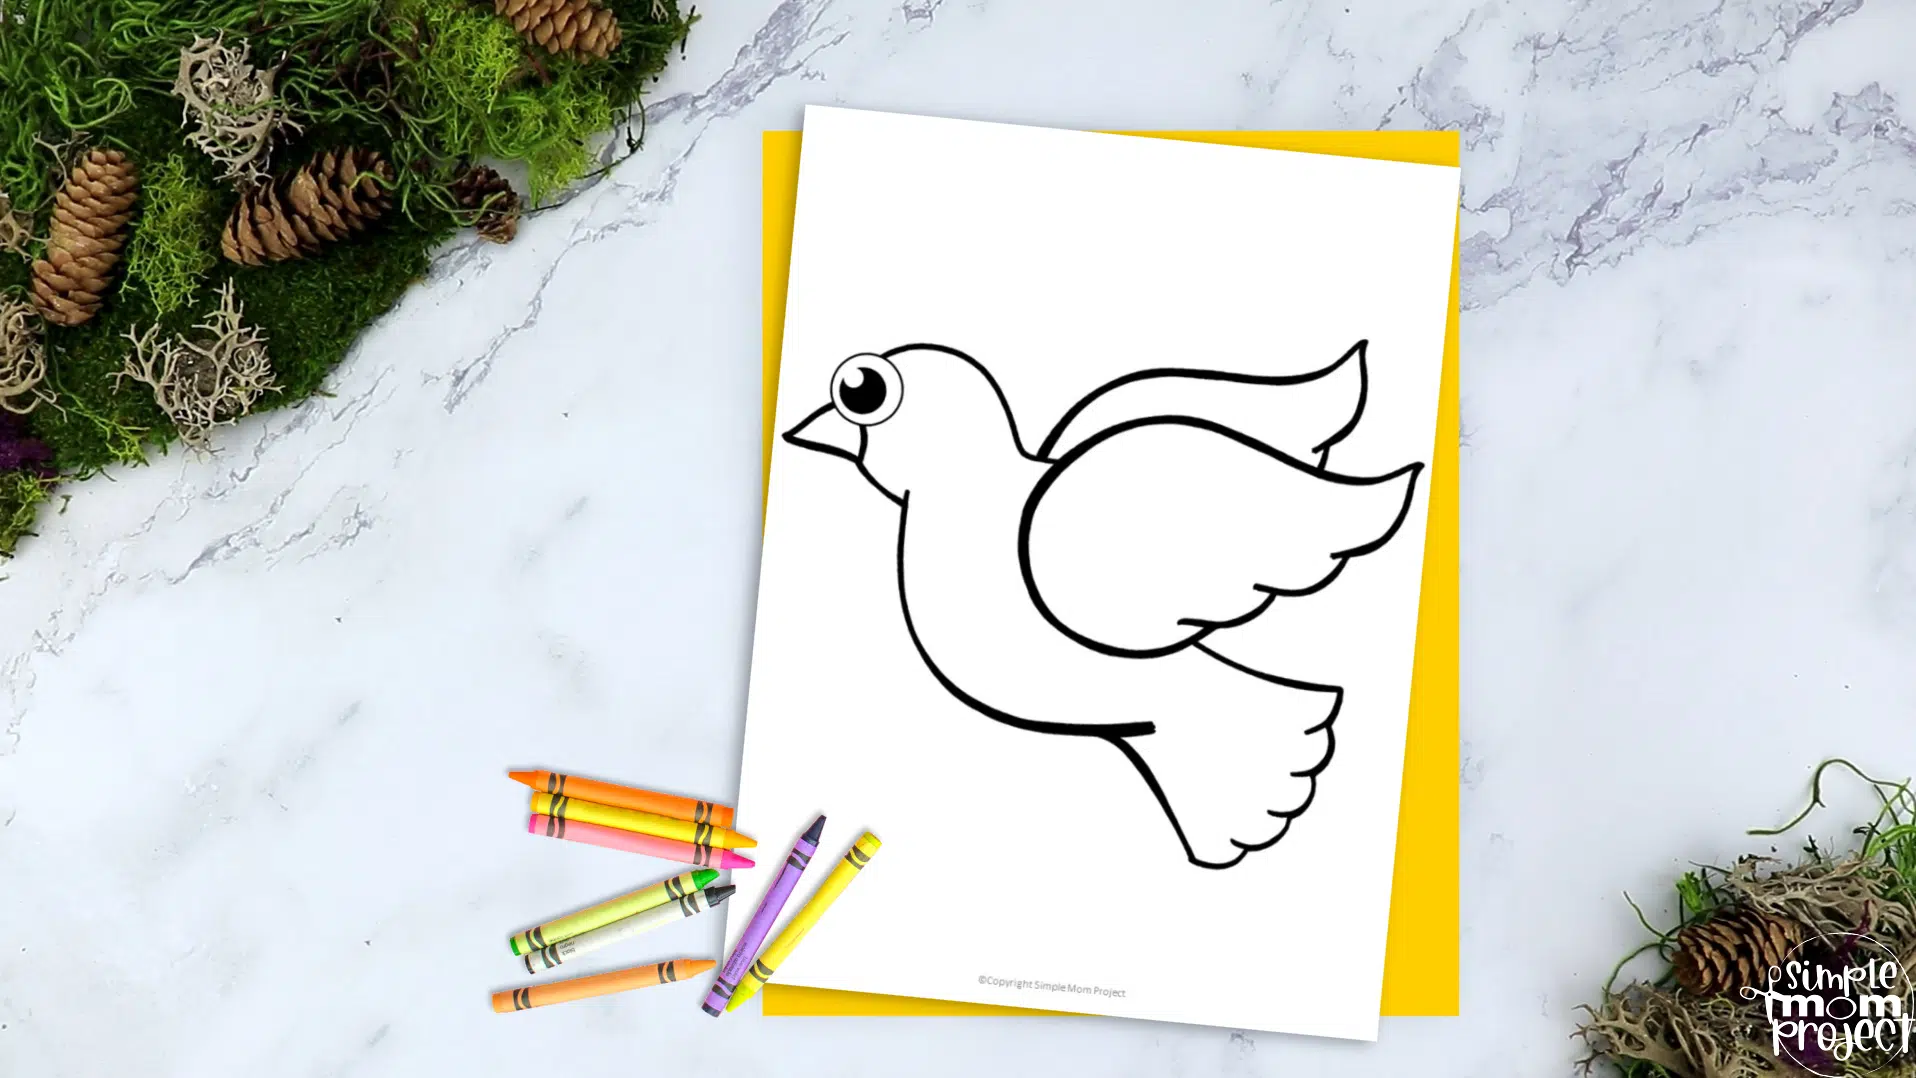 Free printable dove template â simple mom project